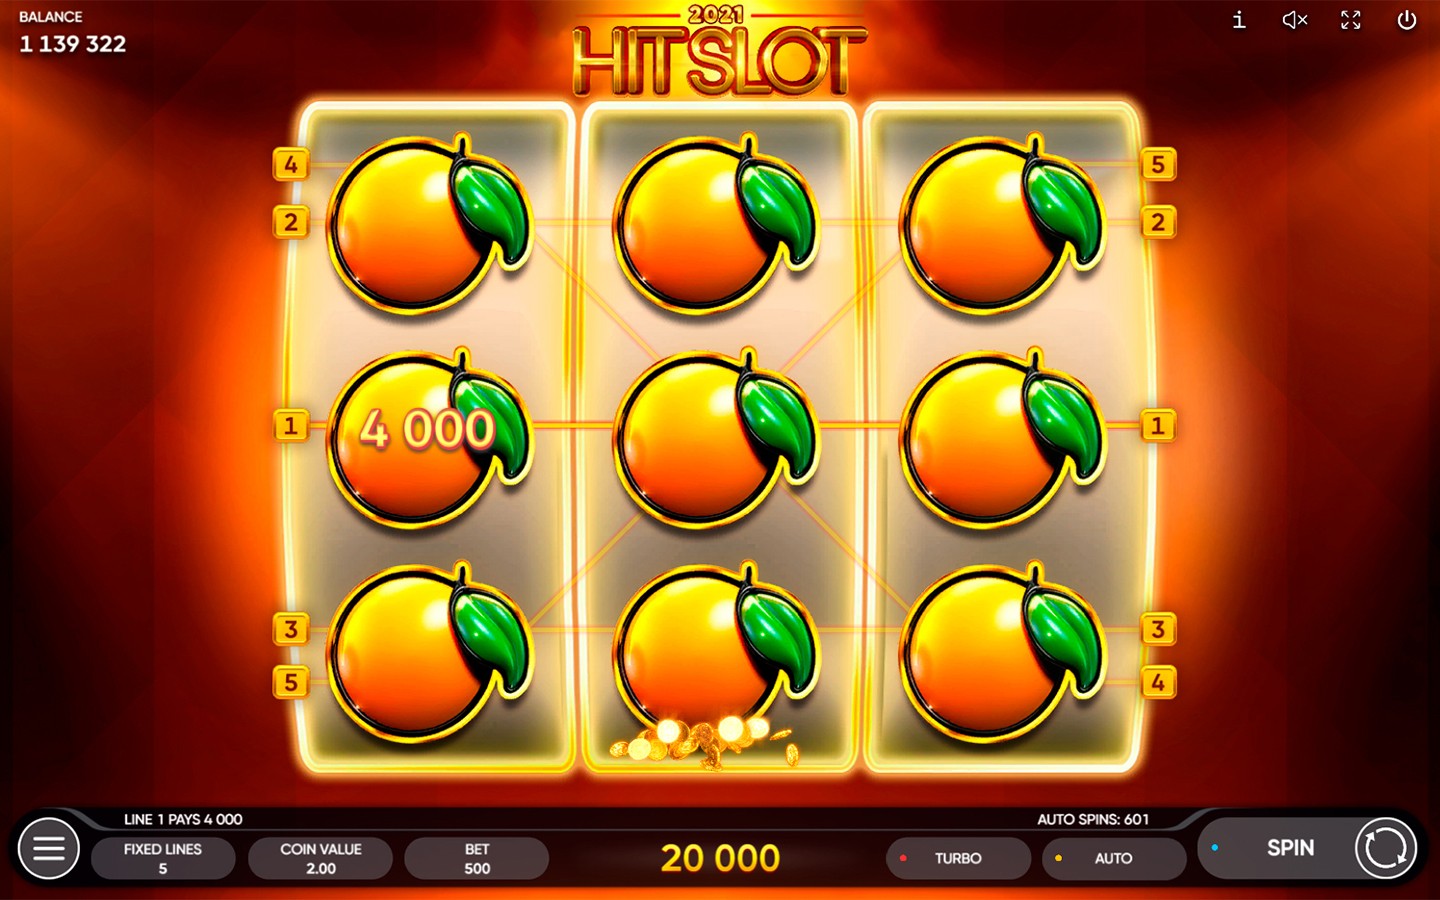 TOP CASINO PROVIDER | 2021 HIT SLOT is out!